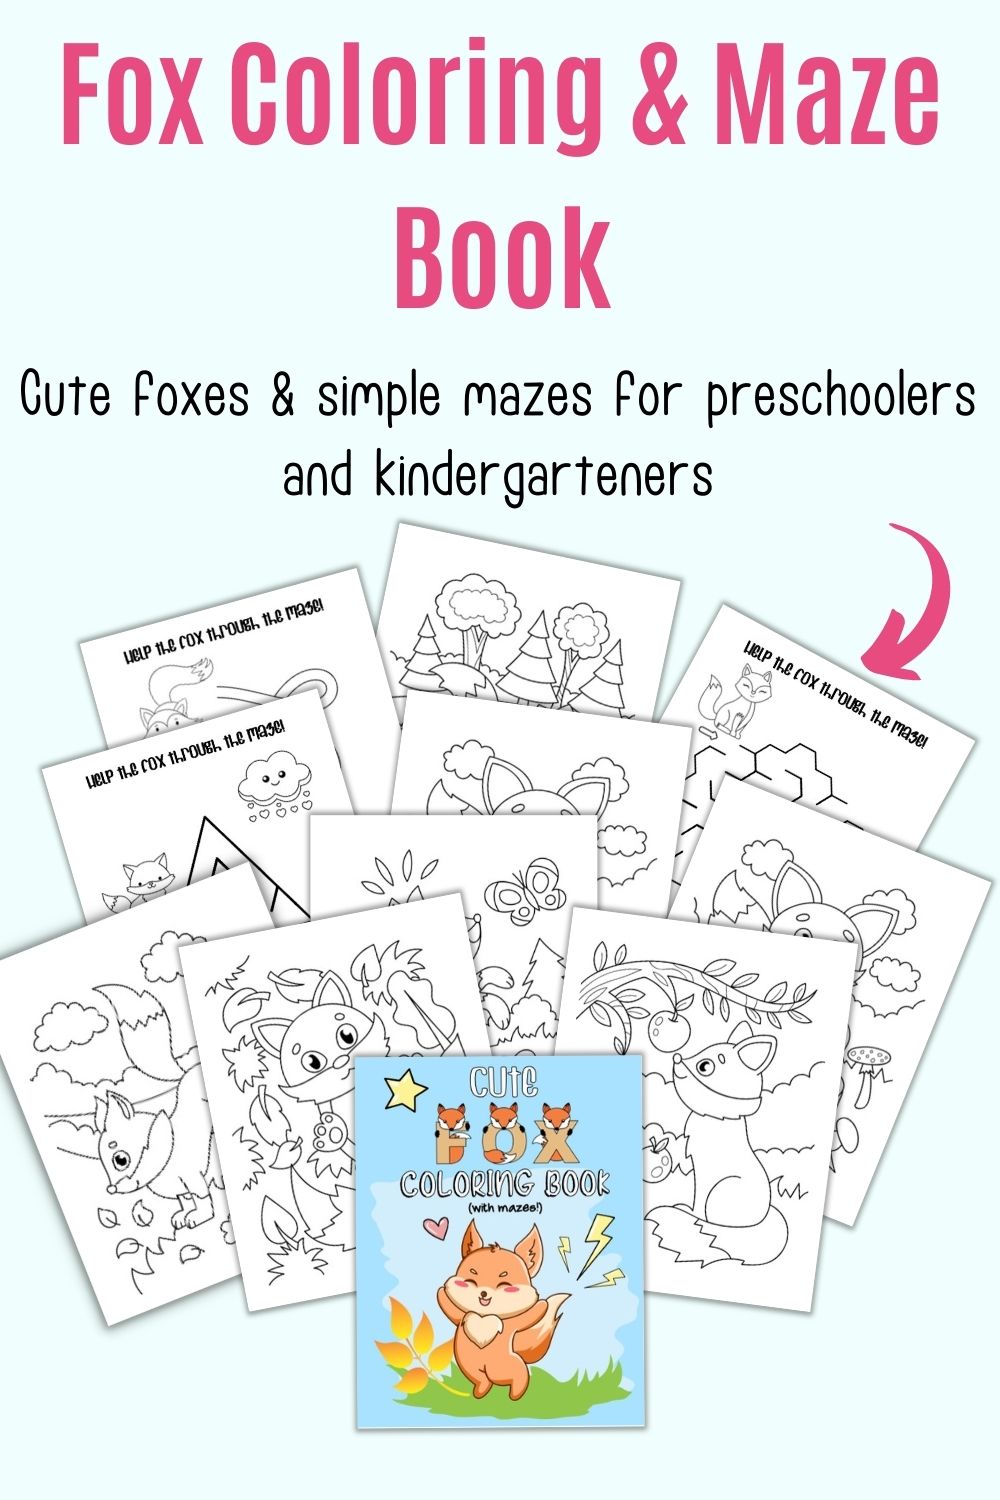 Text "Fox Coloring & Maze Book - Cute foxes and simple mazes for preschoolers and kindergarteners" above a preview of pages from a fox coloring book for children 3-5